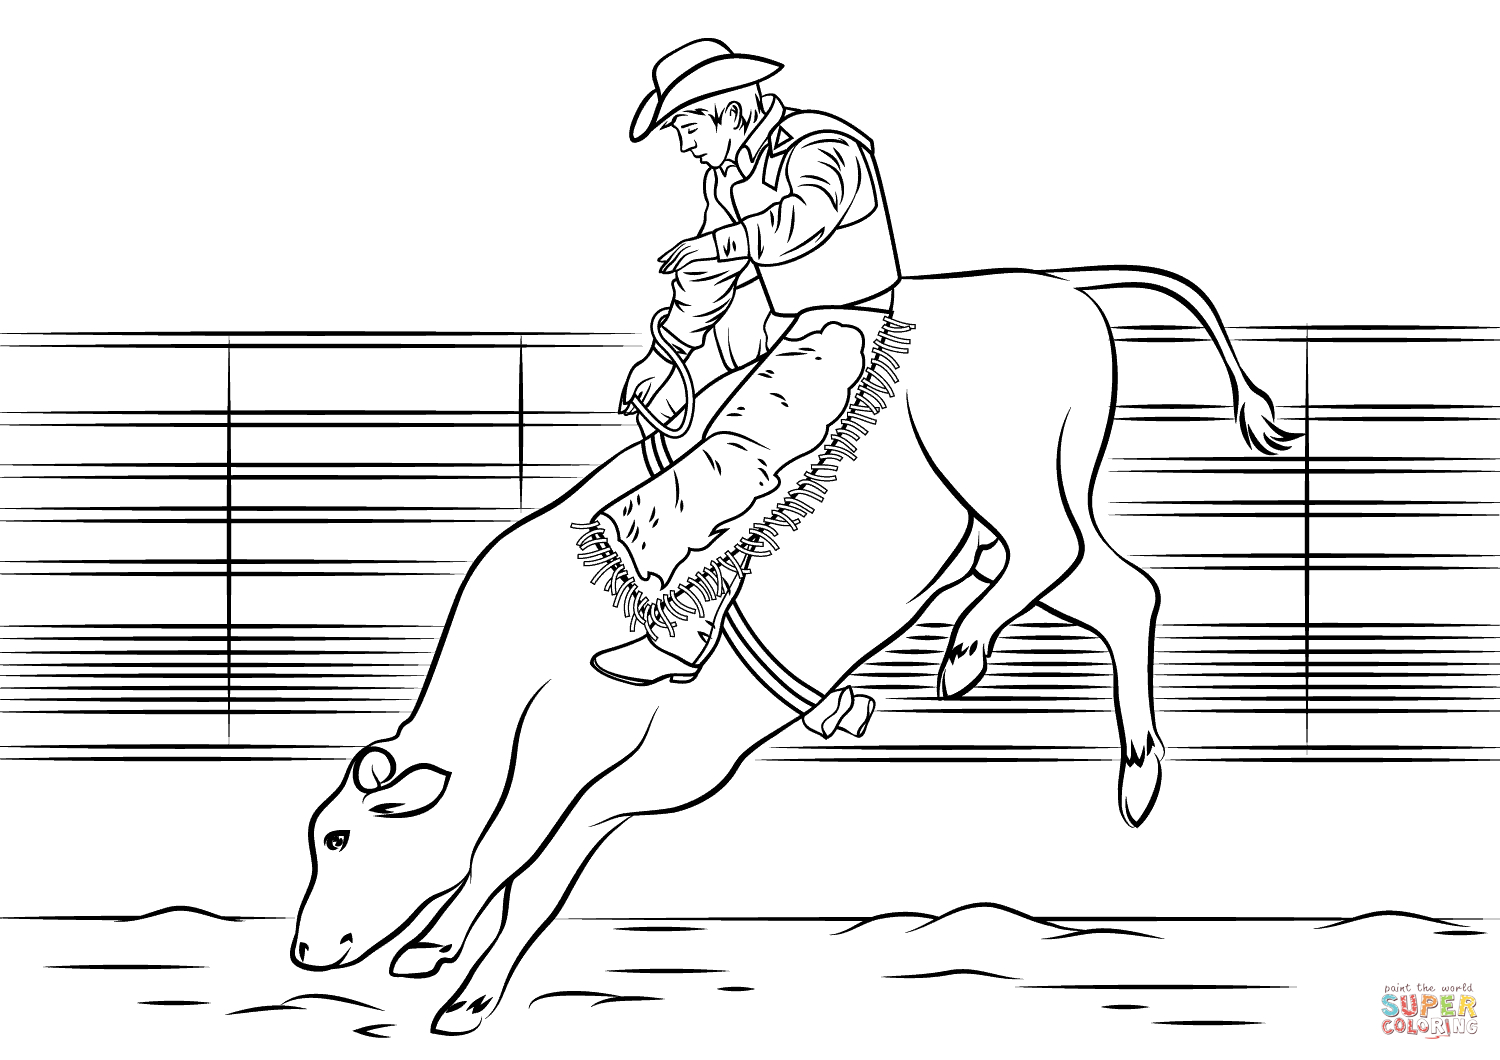 Bull Riding Coloring Pages Bull Riding Coloring Page Free Printable Coloring Pages